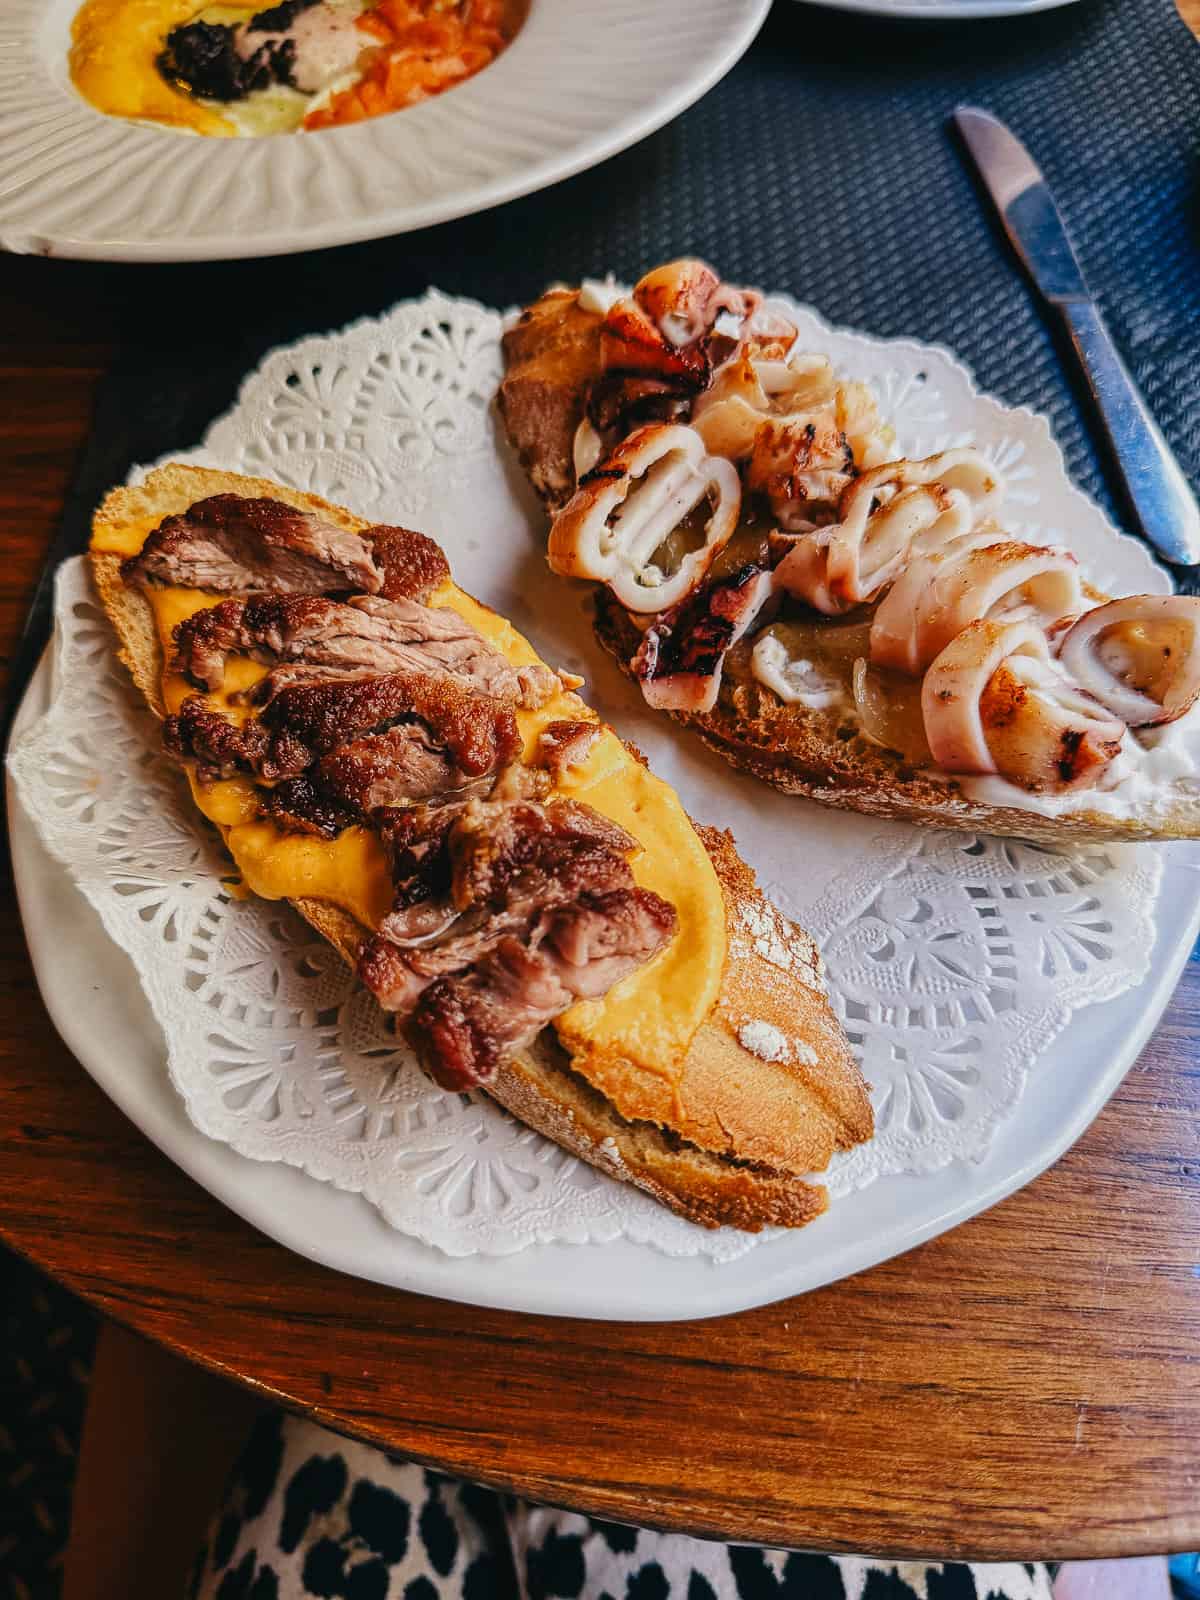 Open-faced sandwiches on crusty bread, one topped with melted cheese and chicken, the other with cheese and calamari rings, served on a lace paper doily